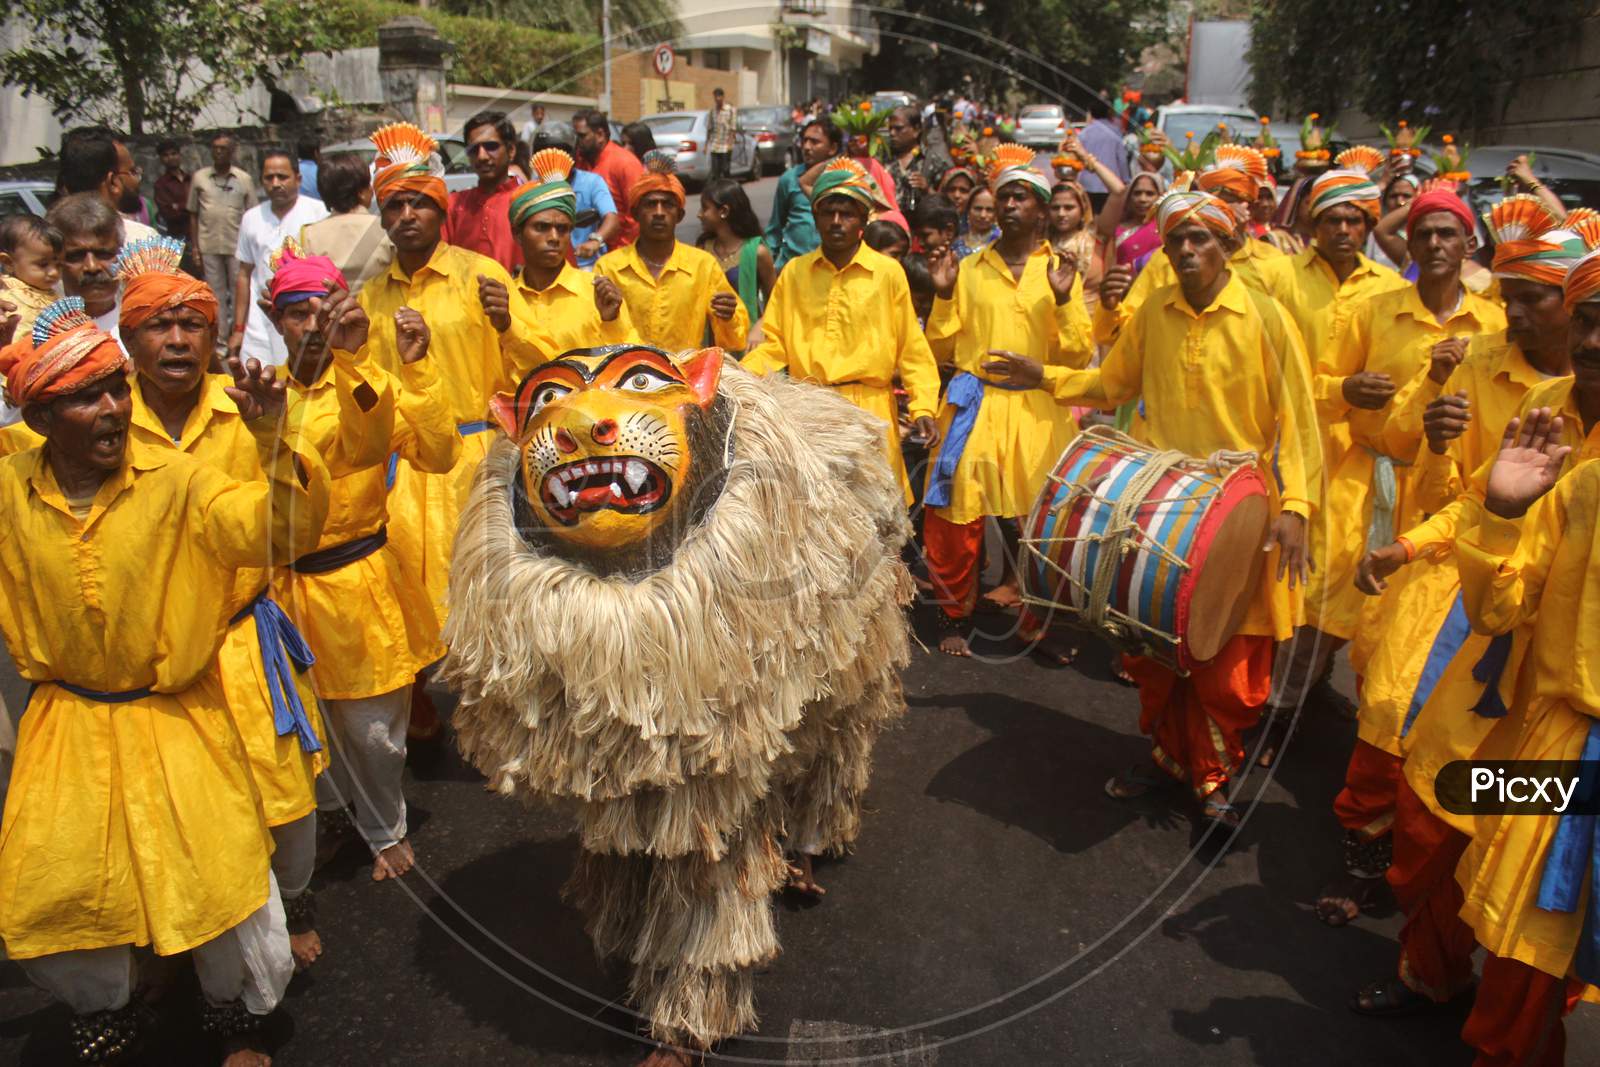 People dressed in traditional costumes take part in the procession to celebrate the Gudi Padwa festival, the beginning of the New Year for Maharashtrians, in Mumbai, India, March 2018.